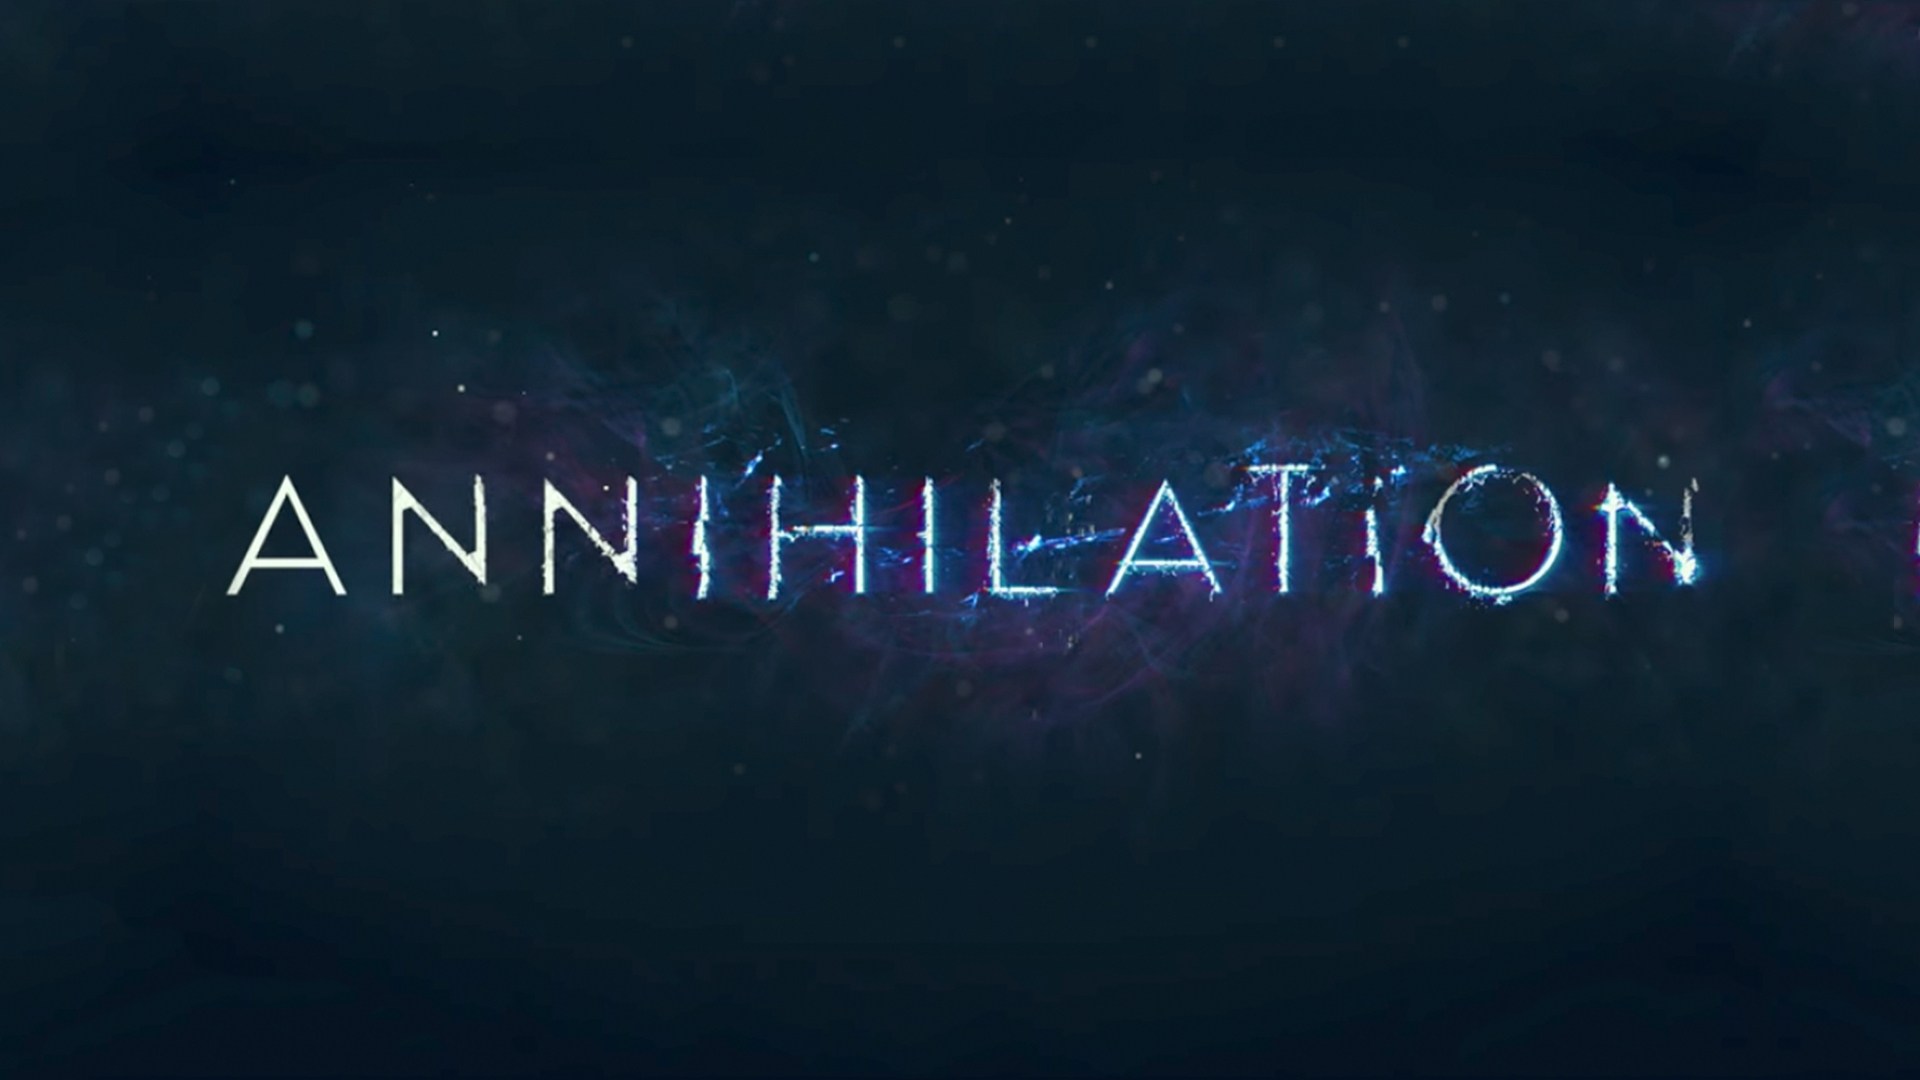 Annihilation Wallpaper 90 images in Collection Page 2